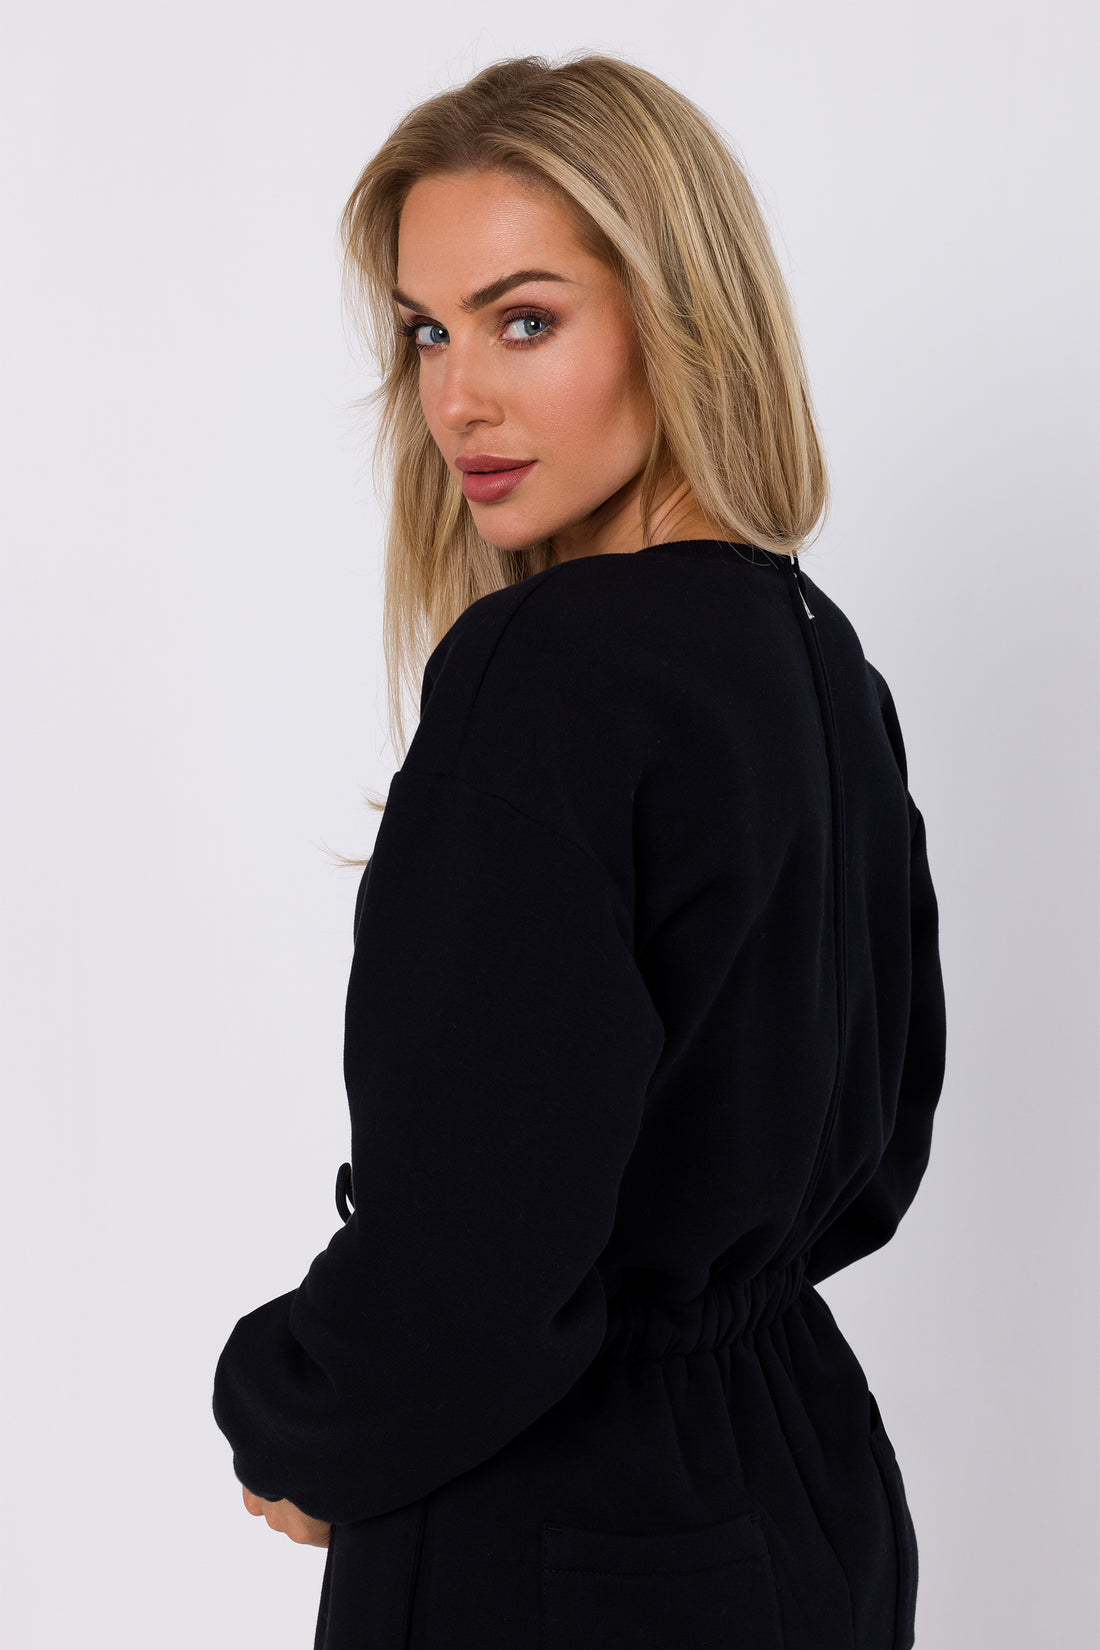 One-Piece Sweatshirt Jumpsuit | Strictly In | Embrace casual chic with our knit one-piece jumpsuit. Long sleeves, elasticated waist, and practical pockets make it your go-to for easy, stylish comfort.